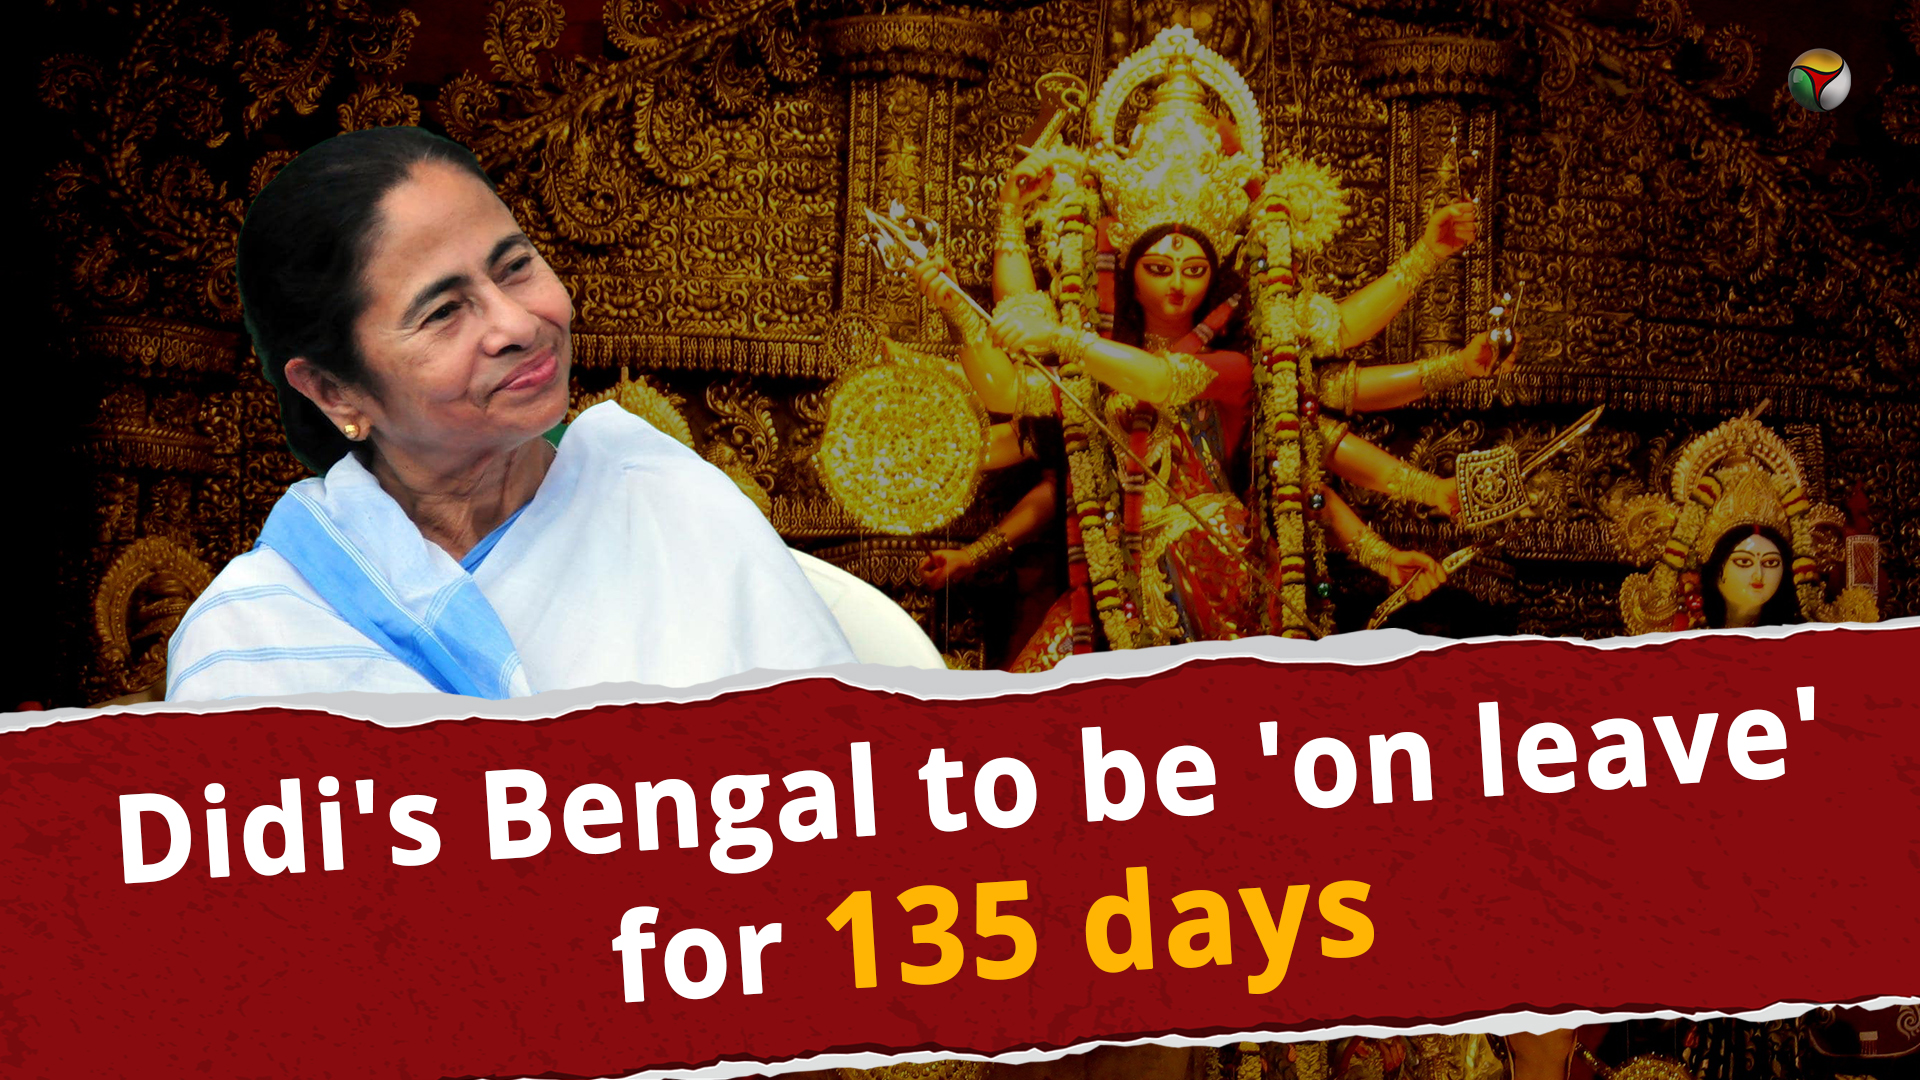 Didis Bengal to be on leave for 135 days